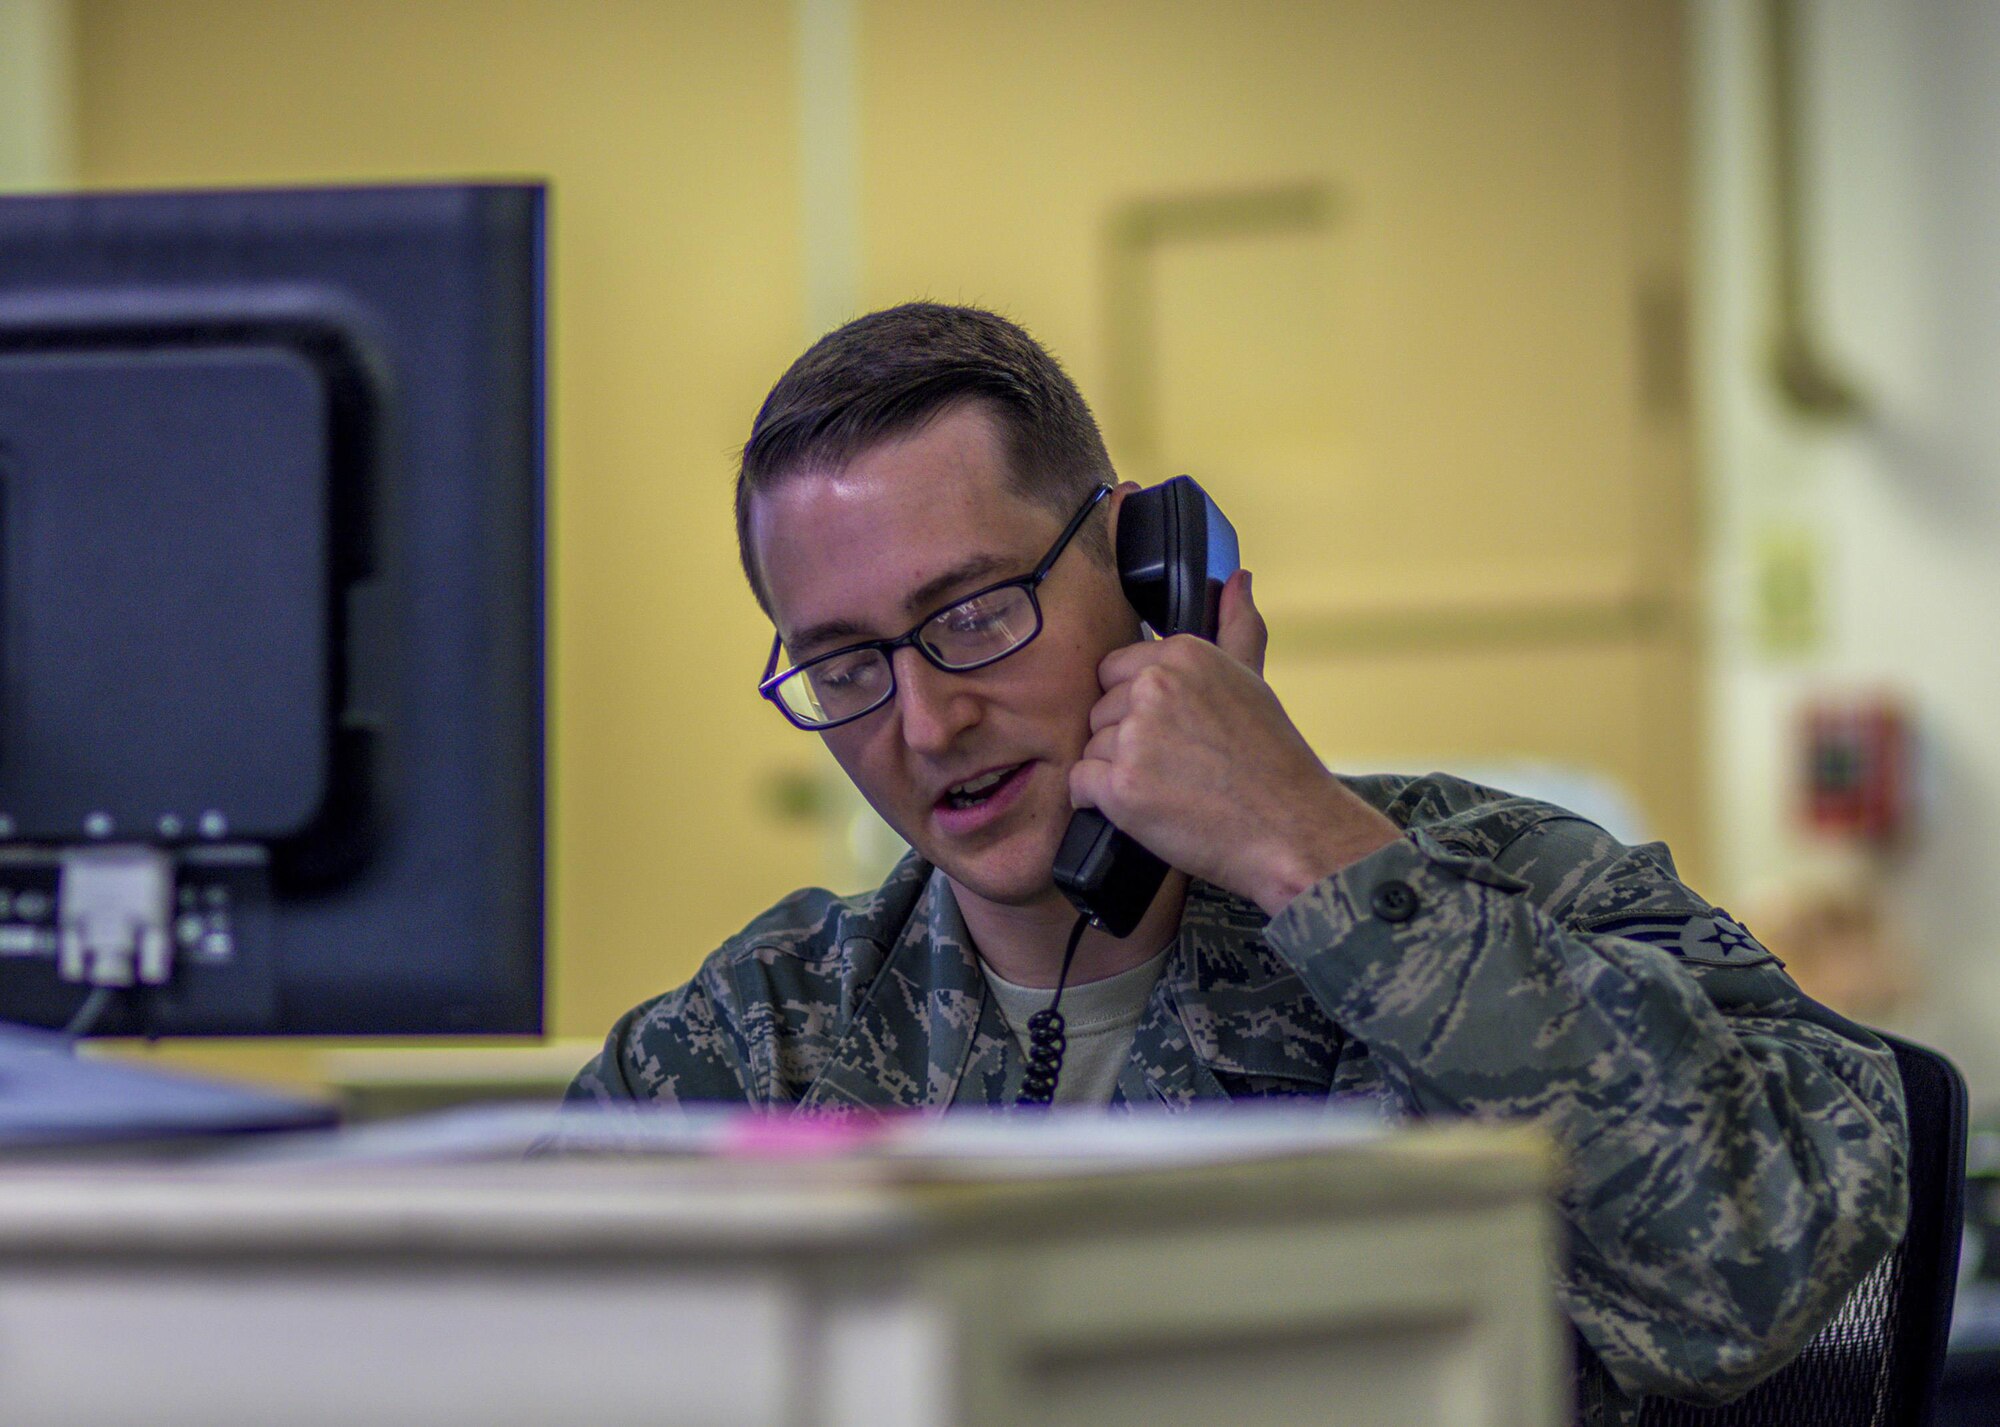 Senior Airman David Ruesche, 20th Space Control Squadron weapons and tactics instructor, calls to report shots fired on the second floor of the building during active shooter training at site C-6 Eglin Air Force Base, Fla., June 27. Walton County Sheriff's Office deputies and first responders from Eglin participated in the joint exercise to improve local active shooter processes, communication, and response coordination. (U.S. Air Force photo/Kristin Stewart)